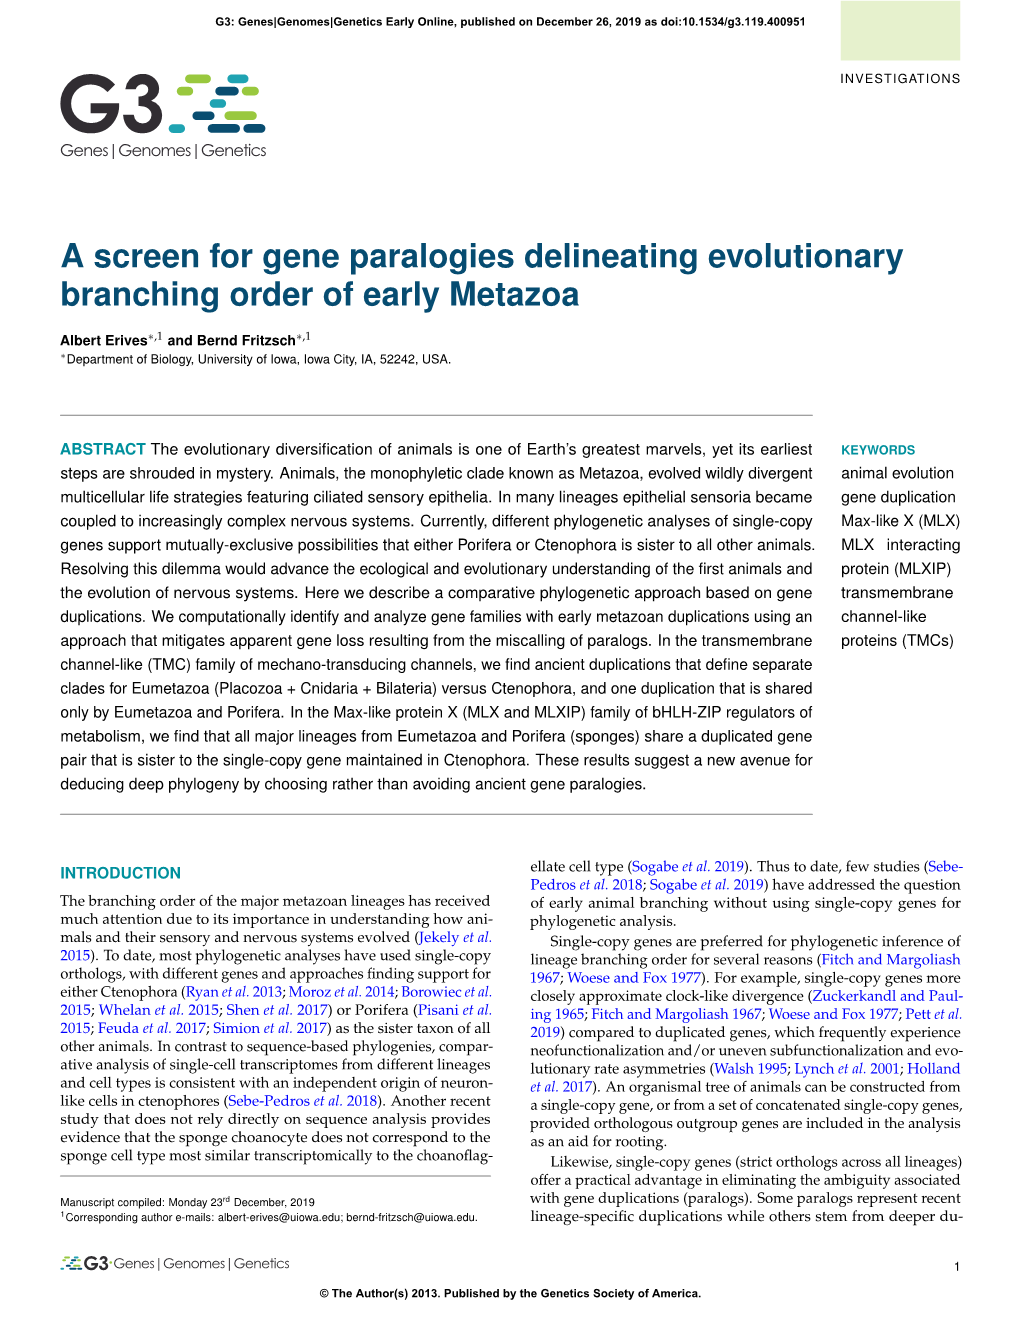 A Screen for Gene Paralogies Delineating Evolutionary Branching Order of Early Metazoa